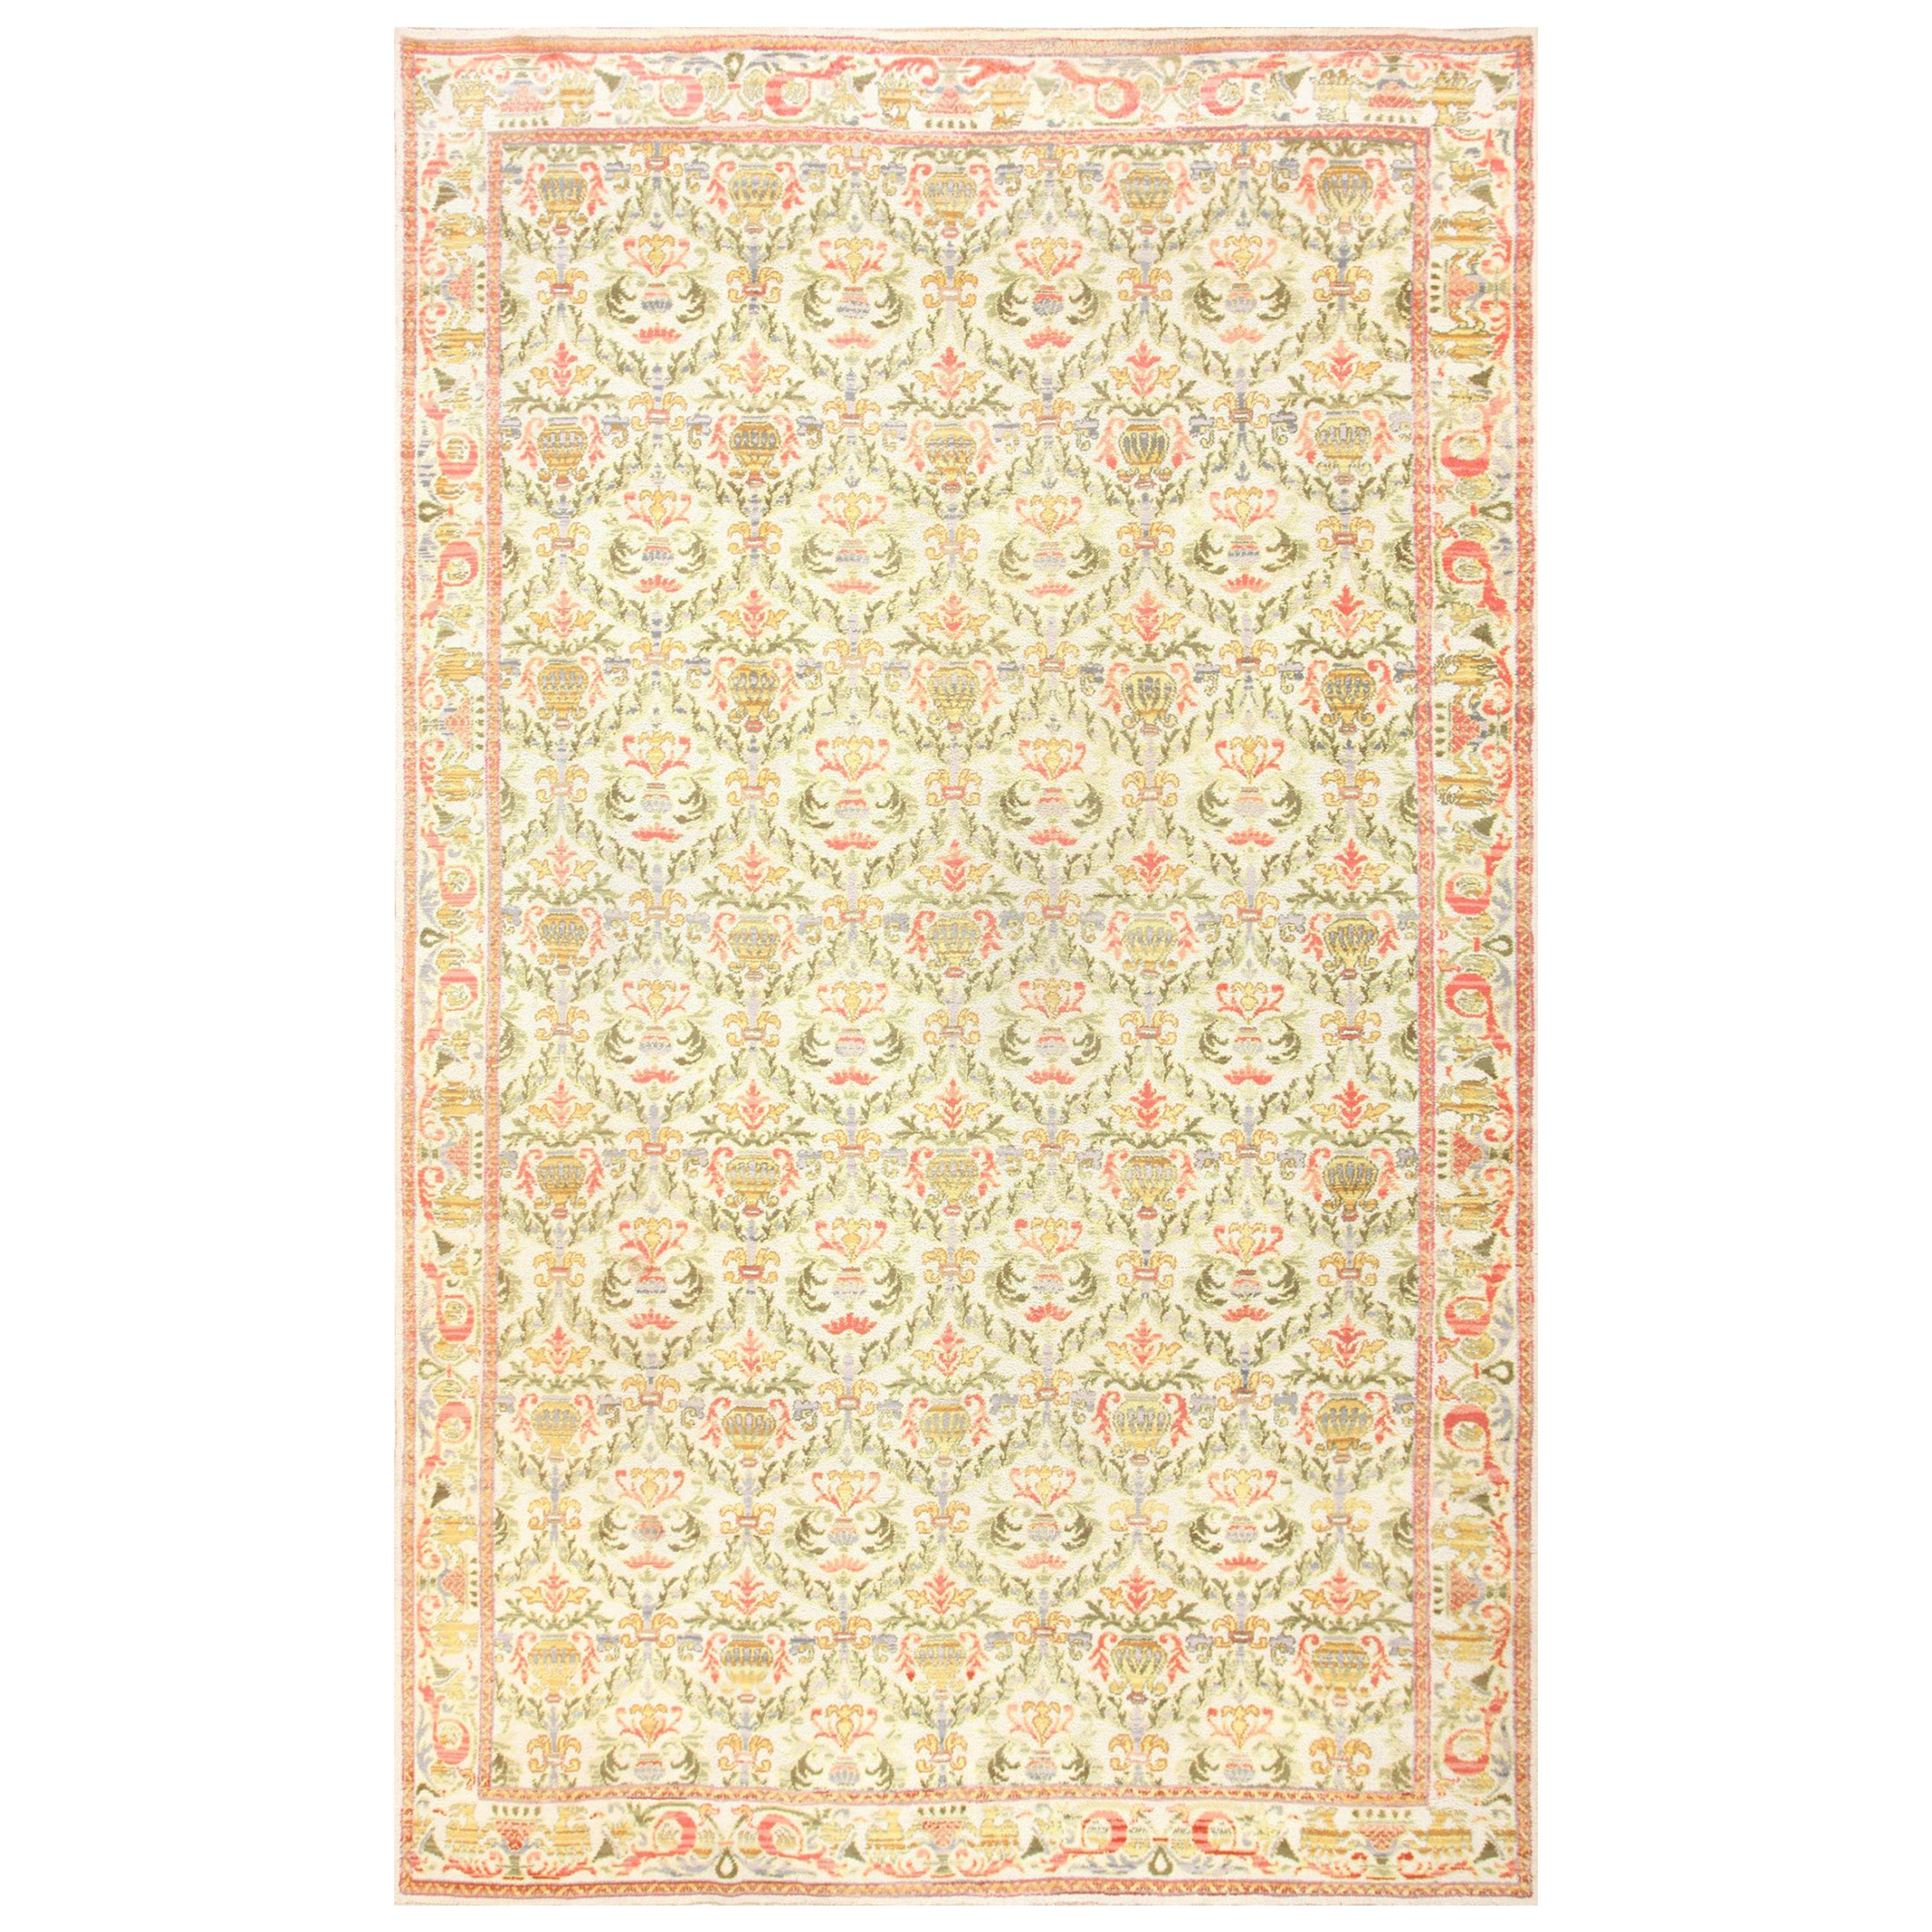 Nazmiyal Collection Antique Spanish Rug. Size: 9 ft 7 in x 15 ft 7 in